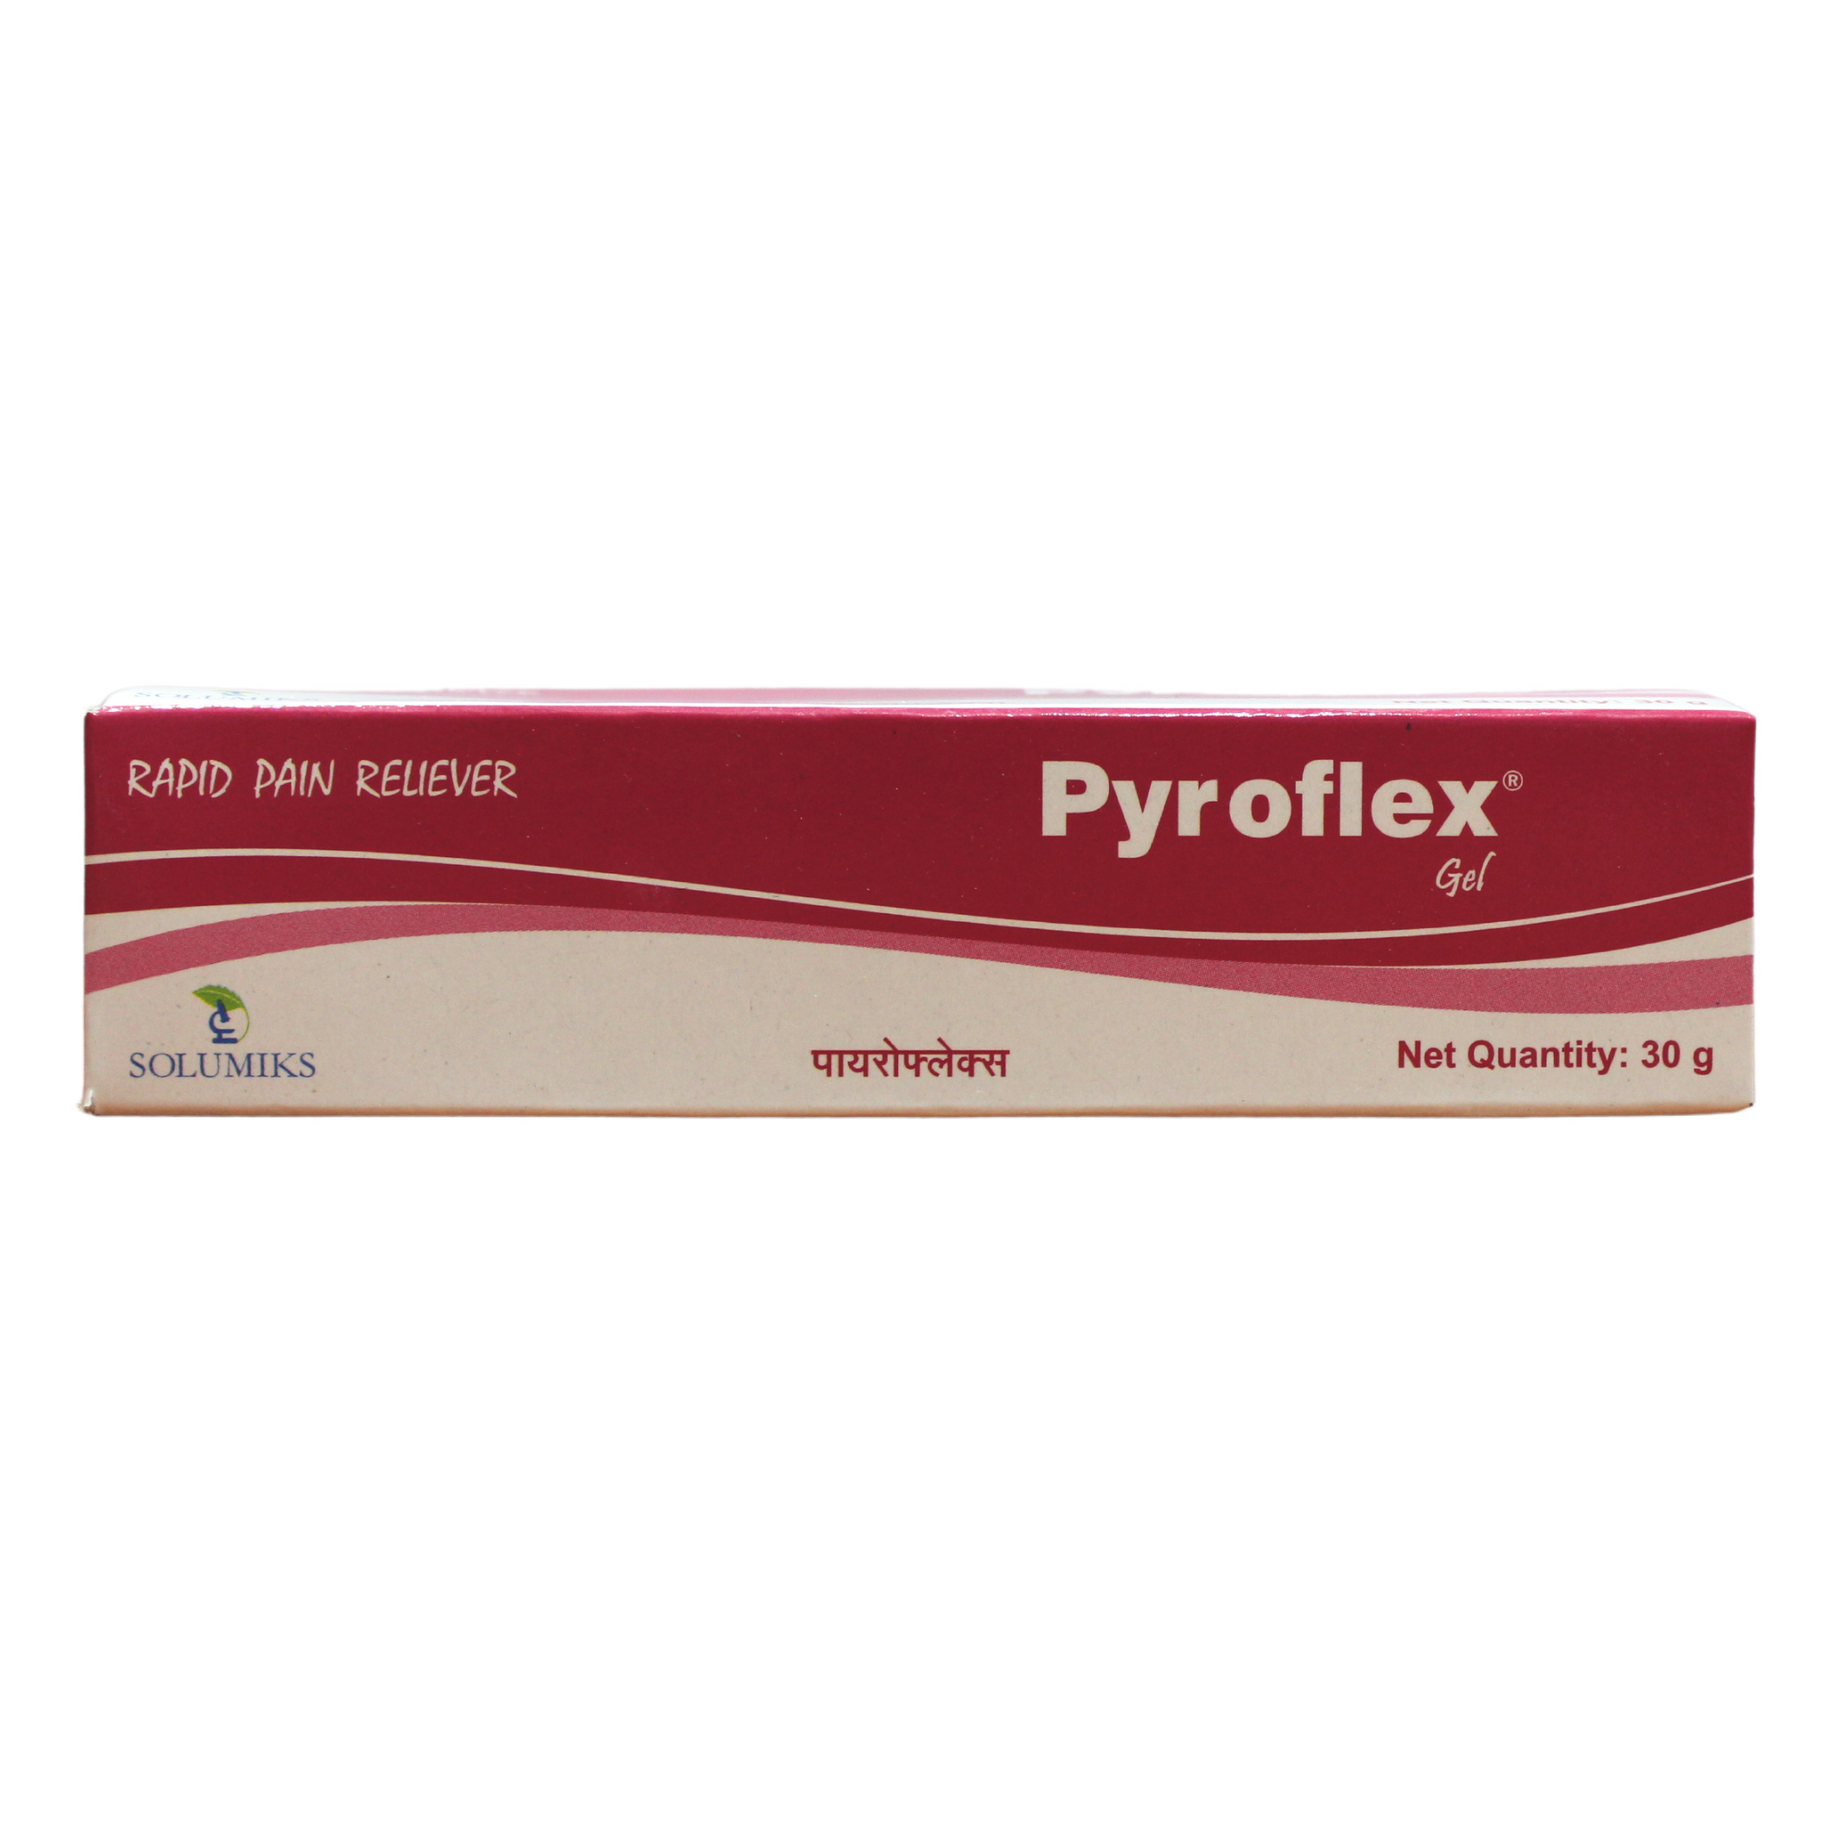 Shop Pyroflex gel 30gm at price 115.00 from Solumiks Online - Ayush Care